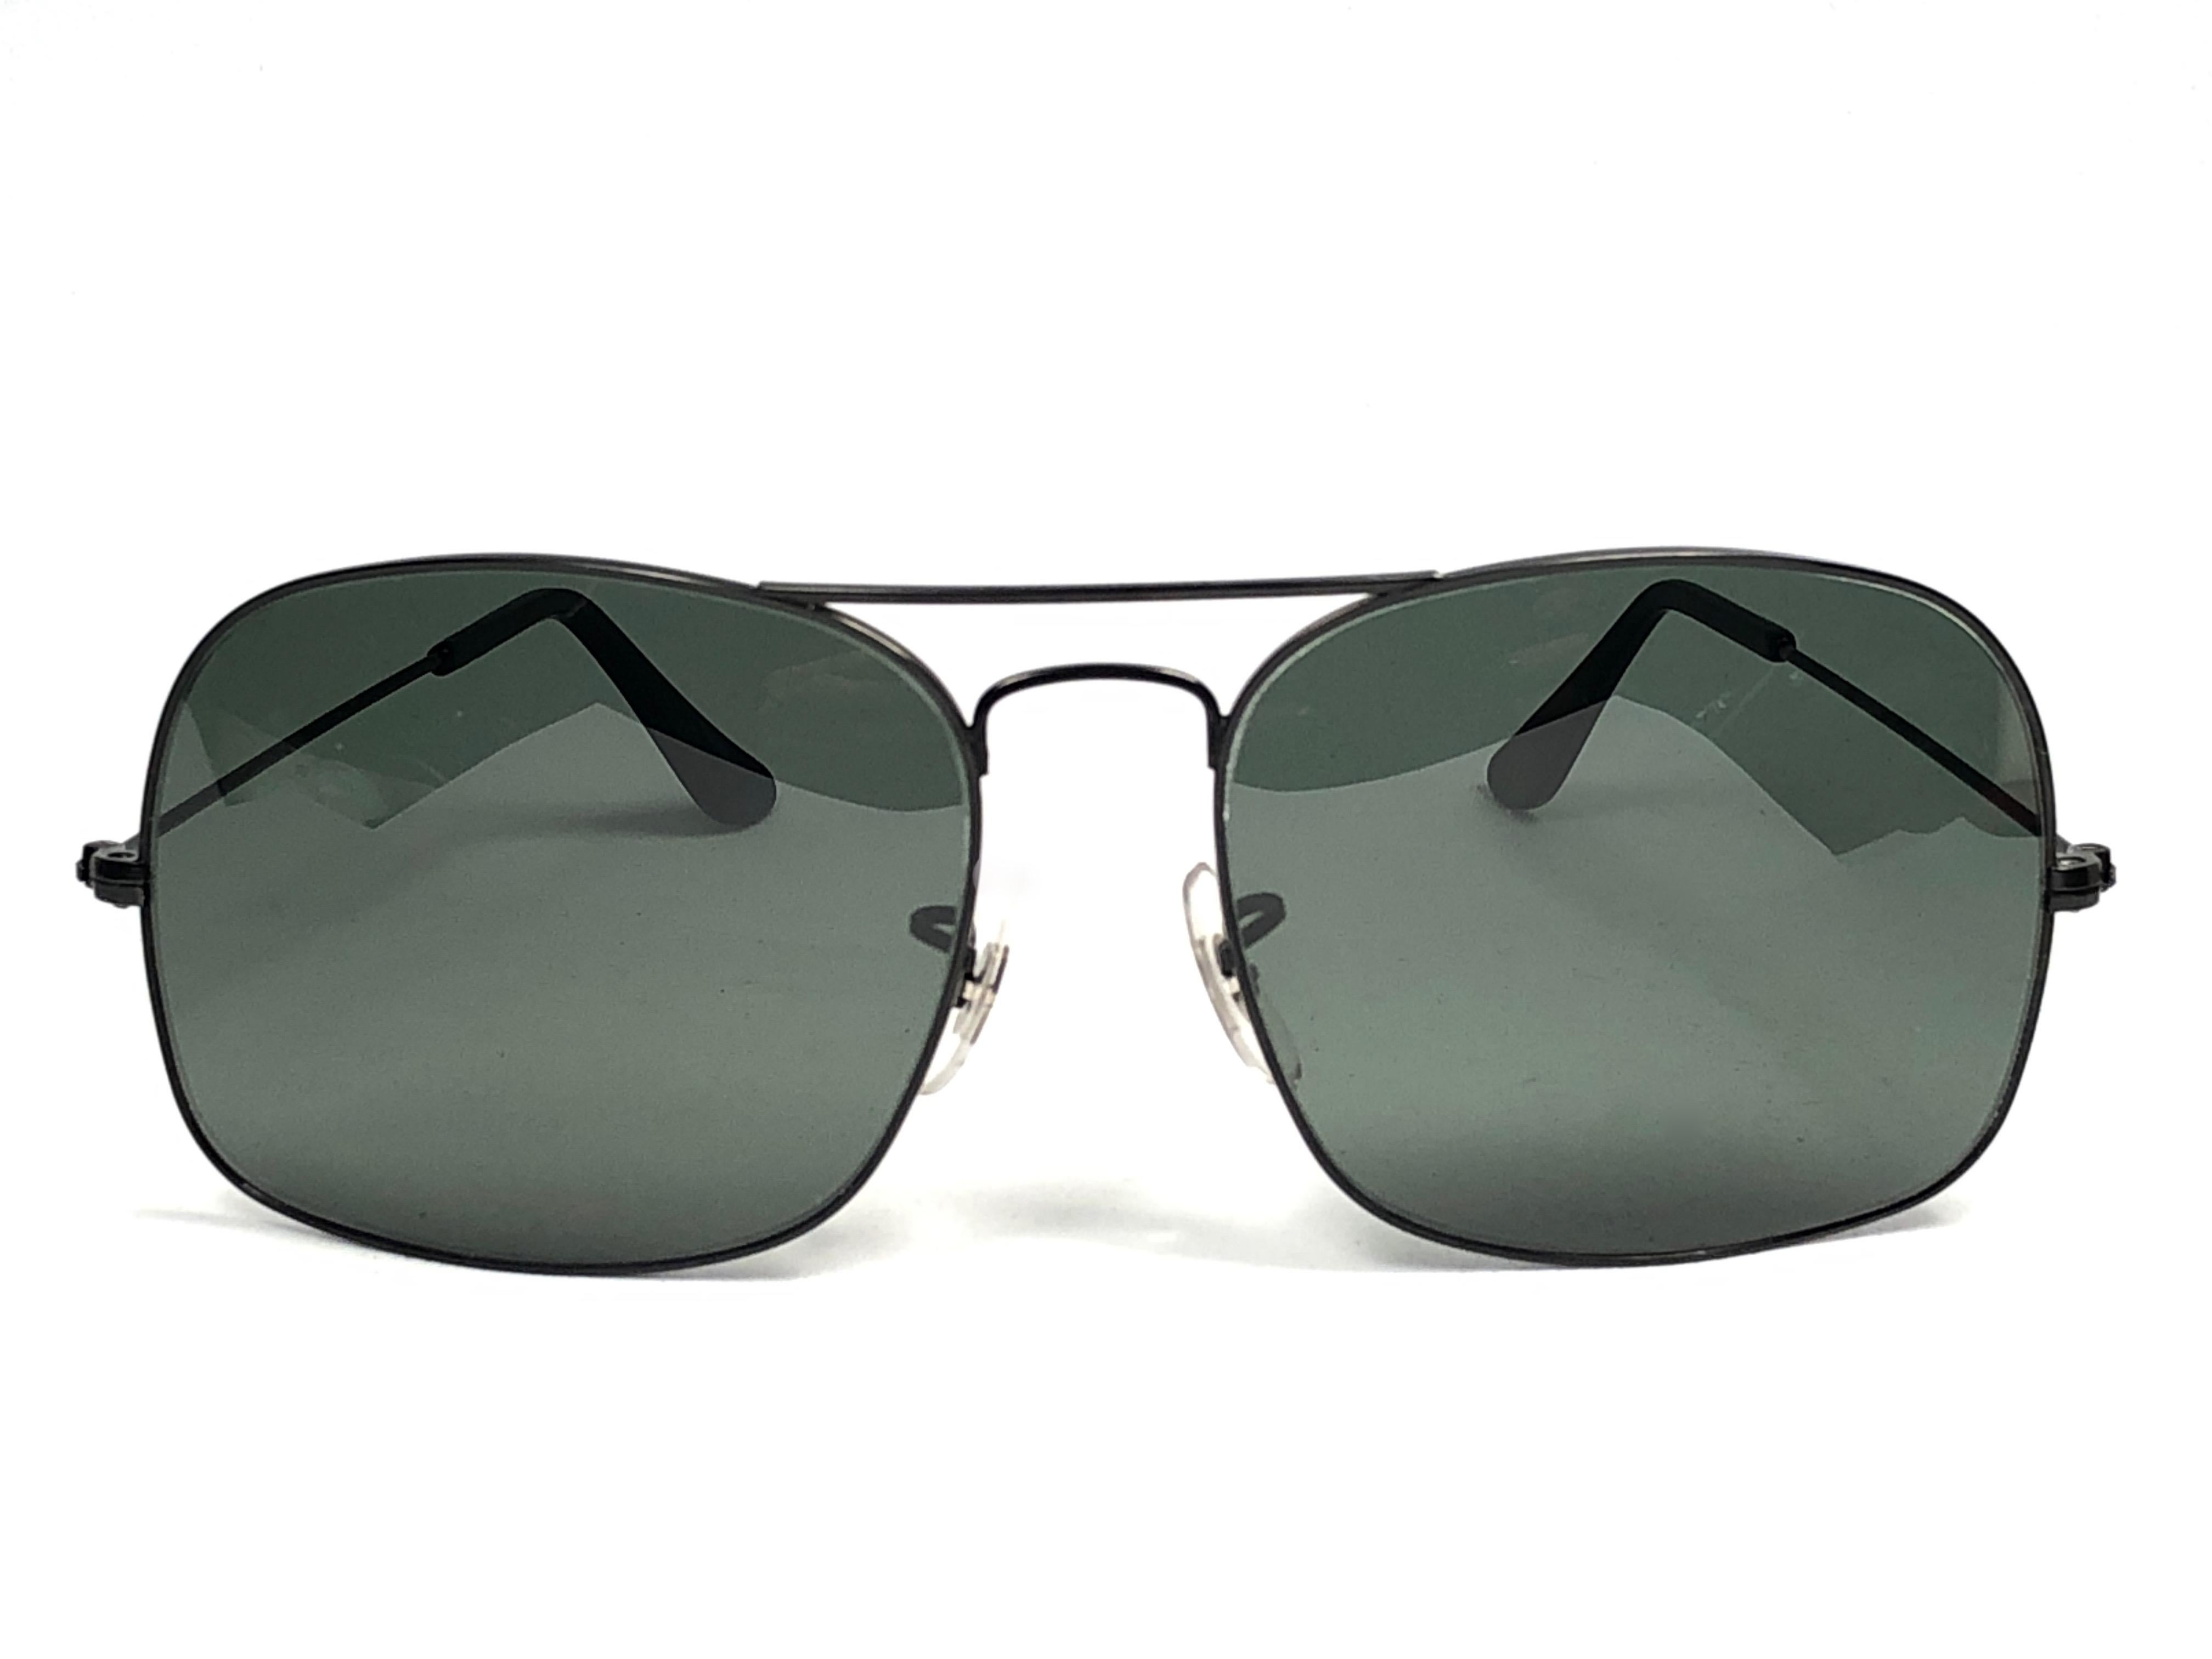 Ray Ban Vintage Avalar Black Grey G15 Lenses B&L Sunglasses, 1970s  In New Condition For Sale In Baleares, Baleares